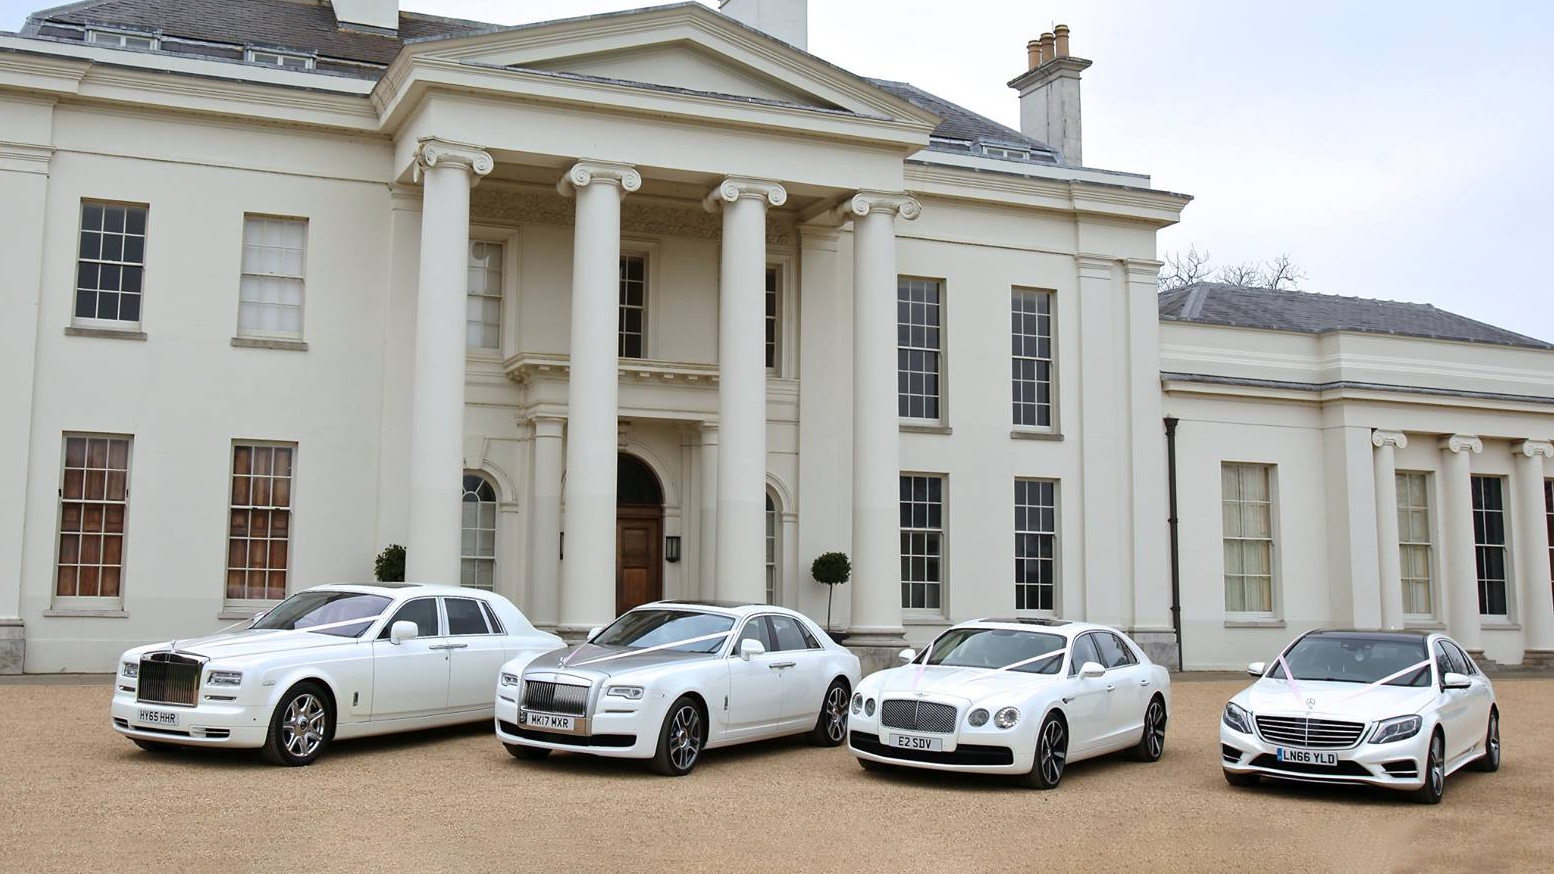 Three Modern Rolls-Royce Phantom and Ghost in White and a White Mercedes in front of a popular wedding venue in Croydon